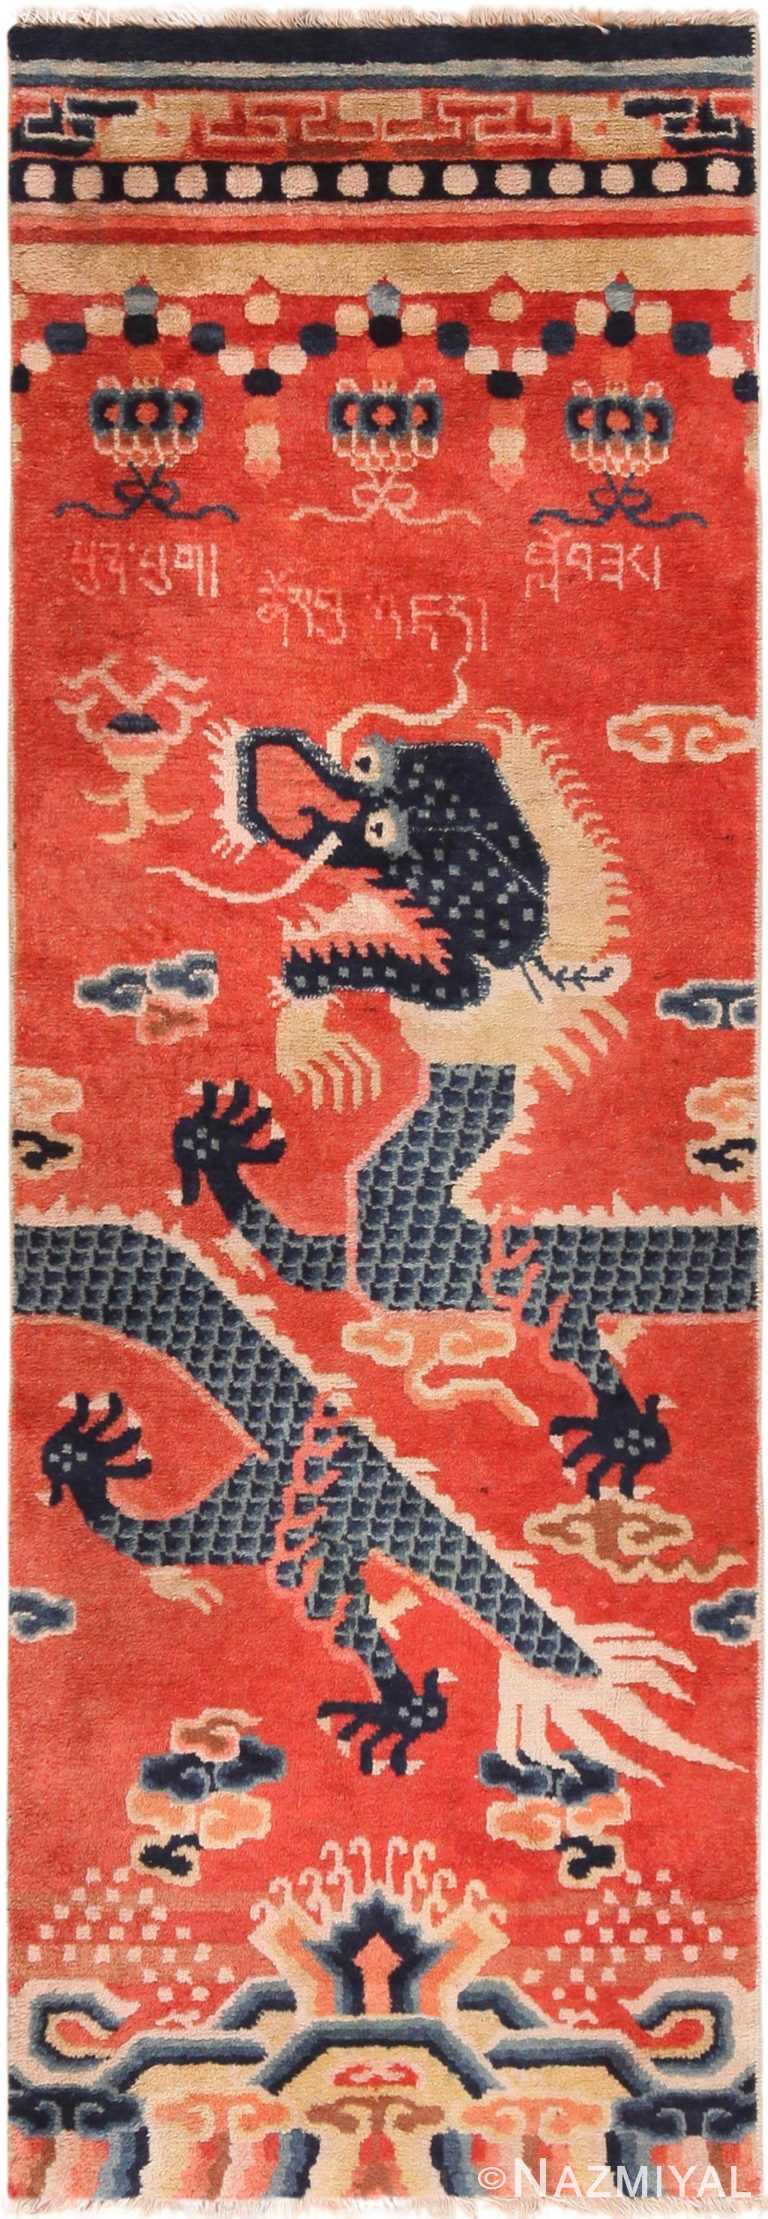 Antique Chinese Ningxia Dragon Rug 70945 by Nazmiyal Antique Rugs